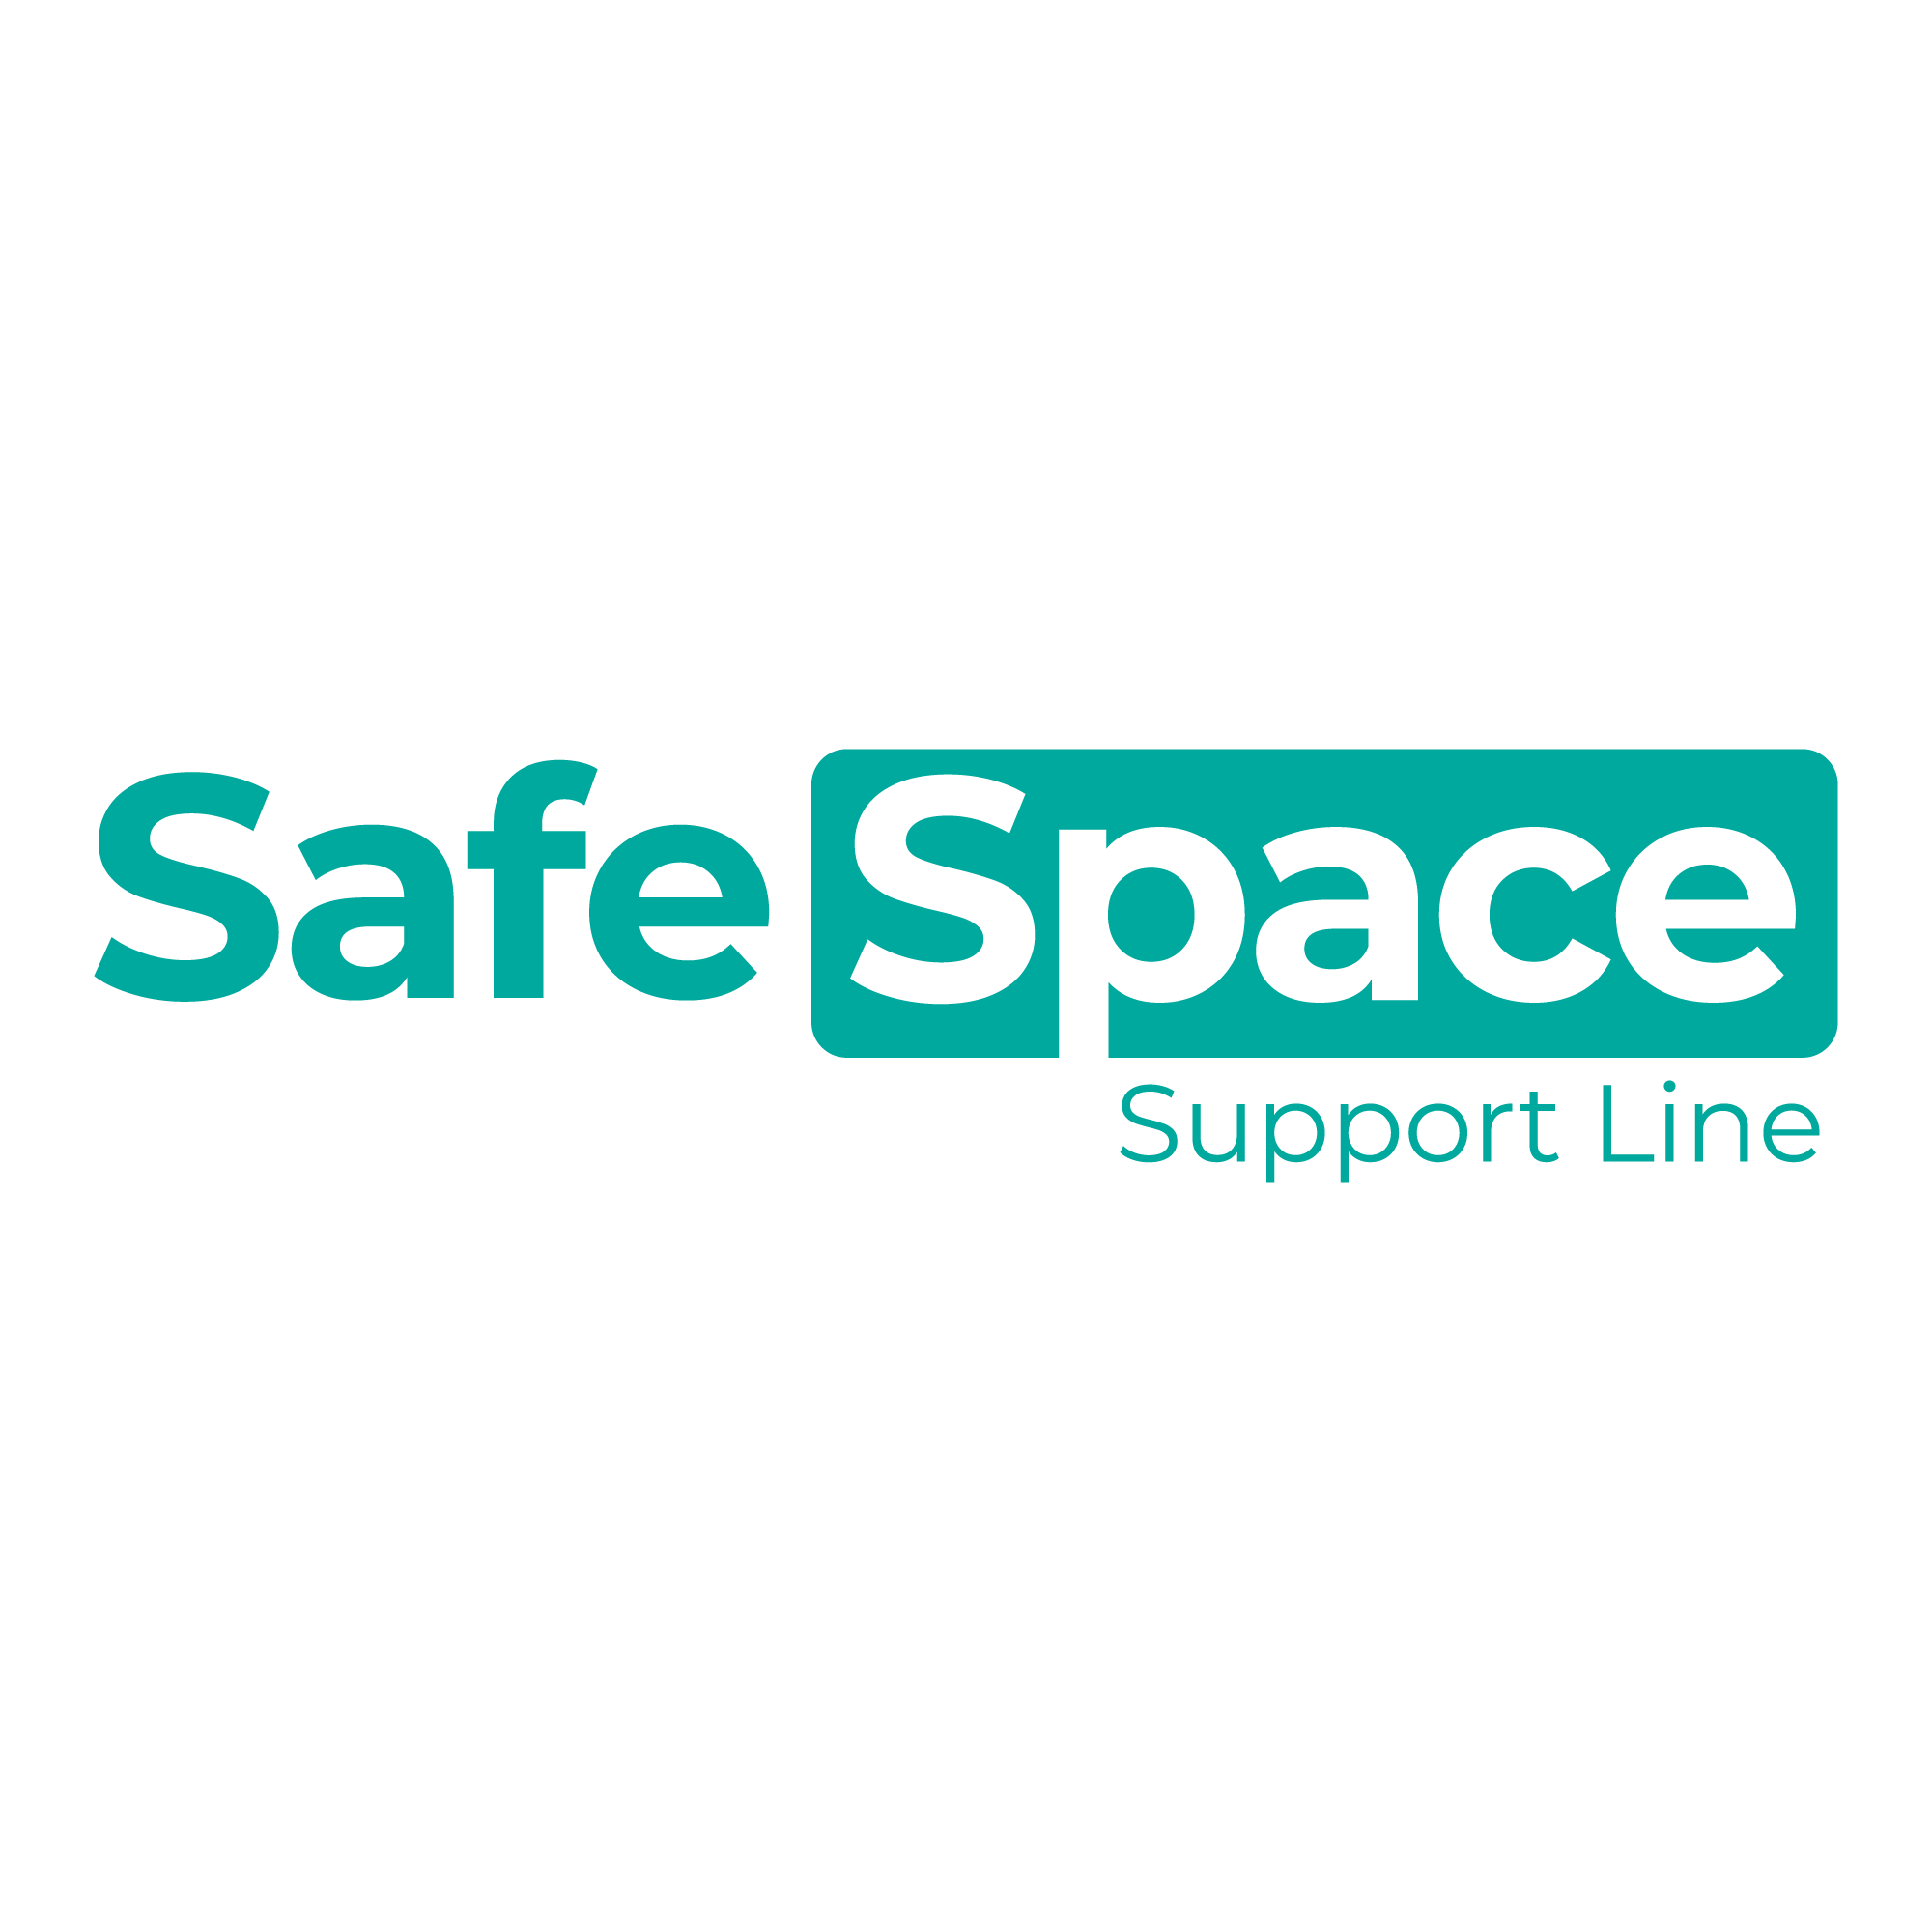 Safe space support line